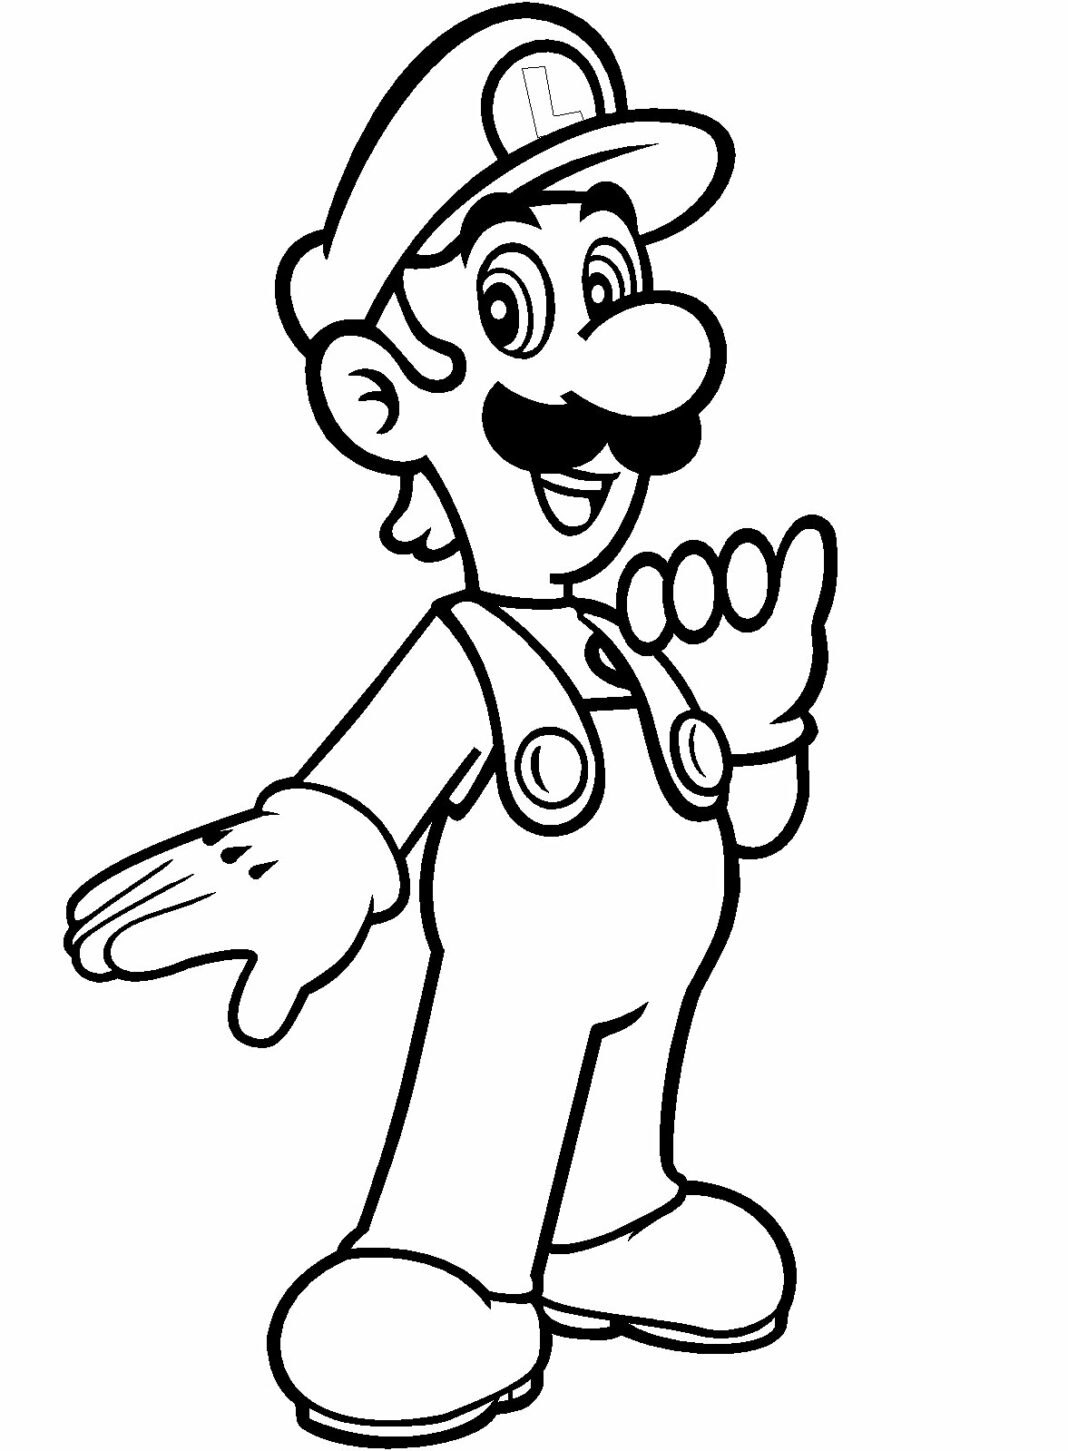 coloring page luigi from the game mario bros